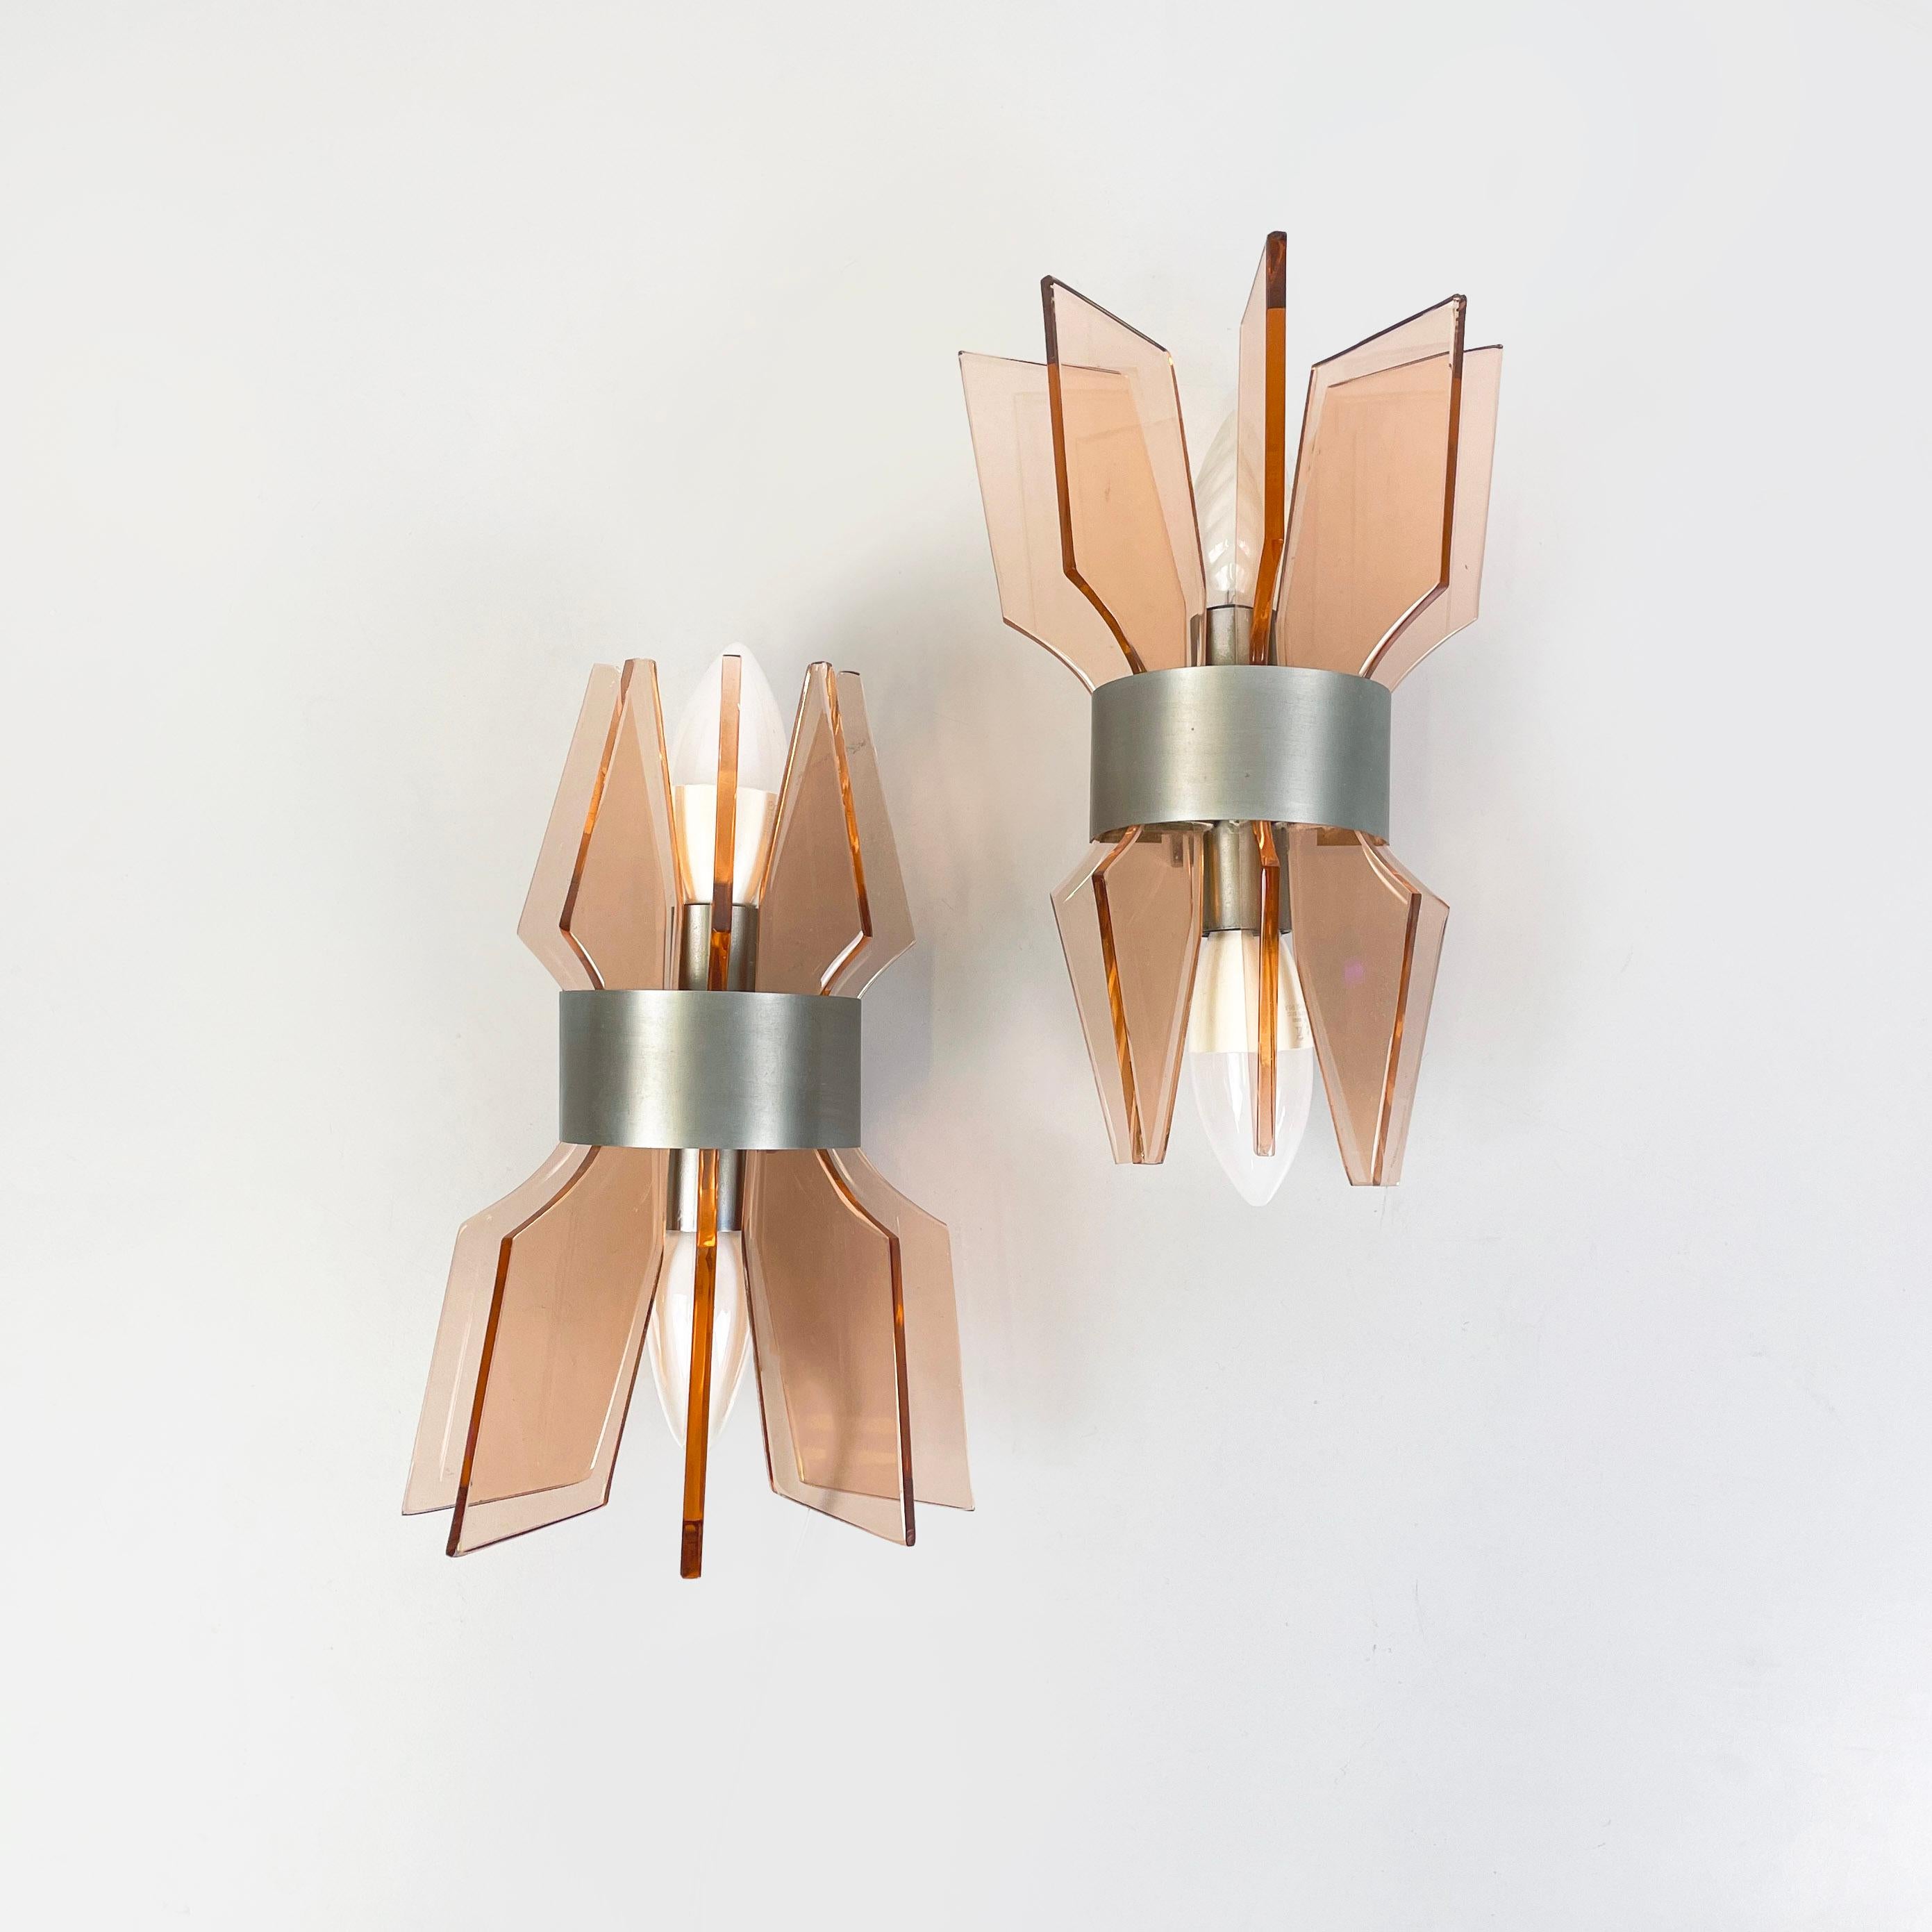 Italian mid-century modern Wall lamps in peach pink glass and metal, 1960s
Pair of wall lamps with double light source. The diffuser is made up of five peach-pink geometric glass plates, which narrow in the centre. The structure is composed of a